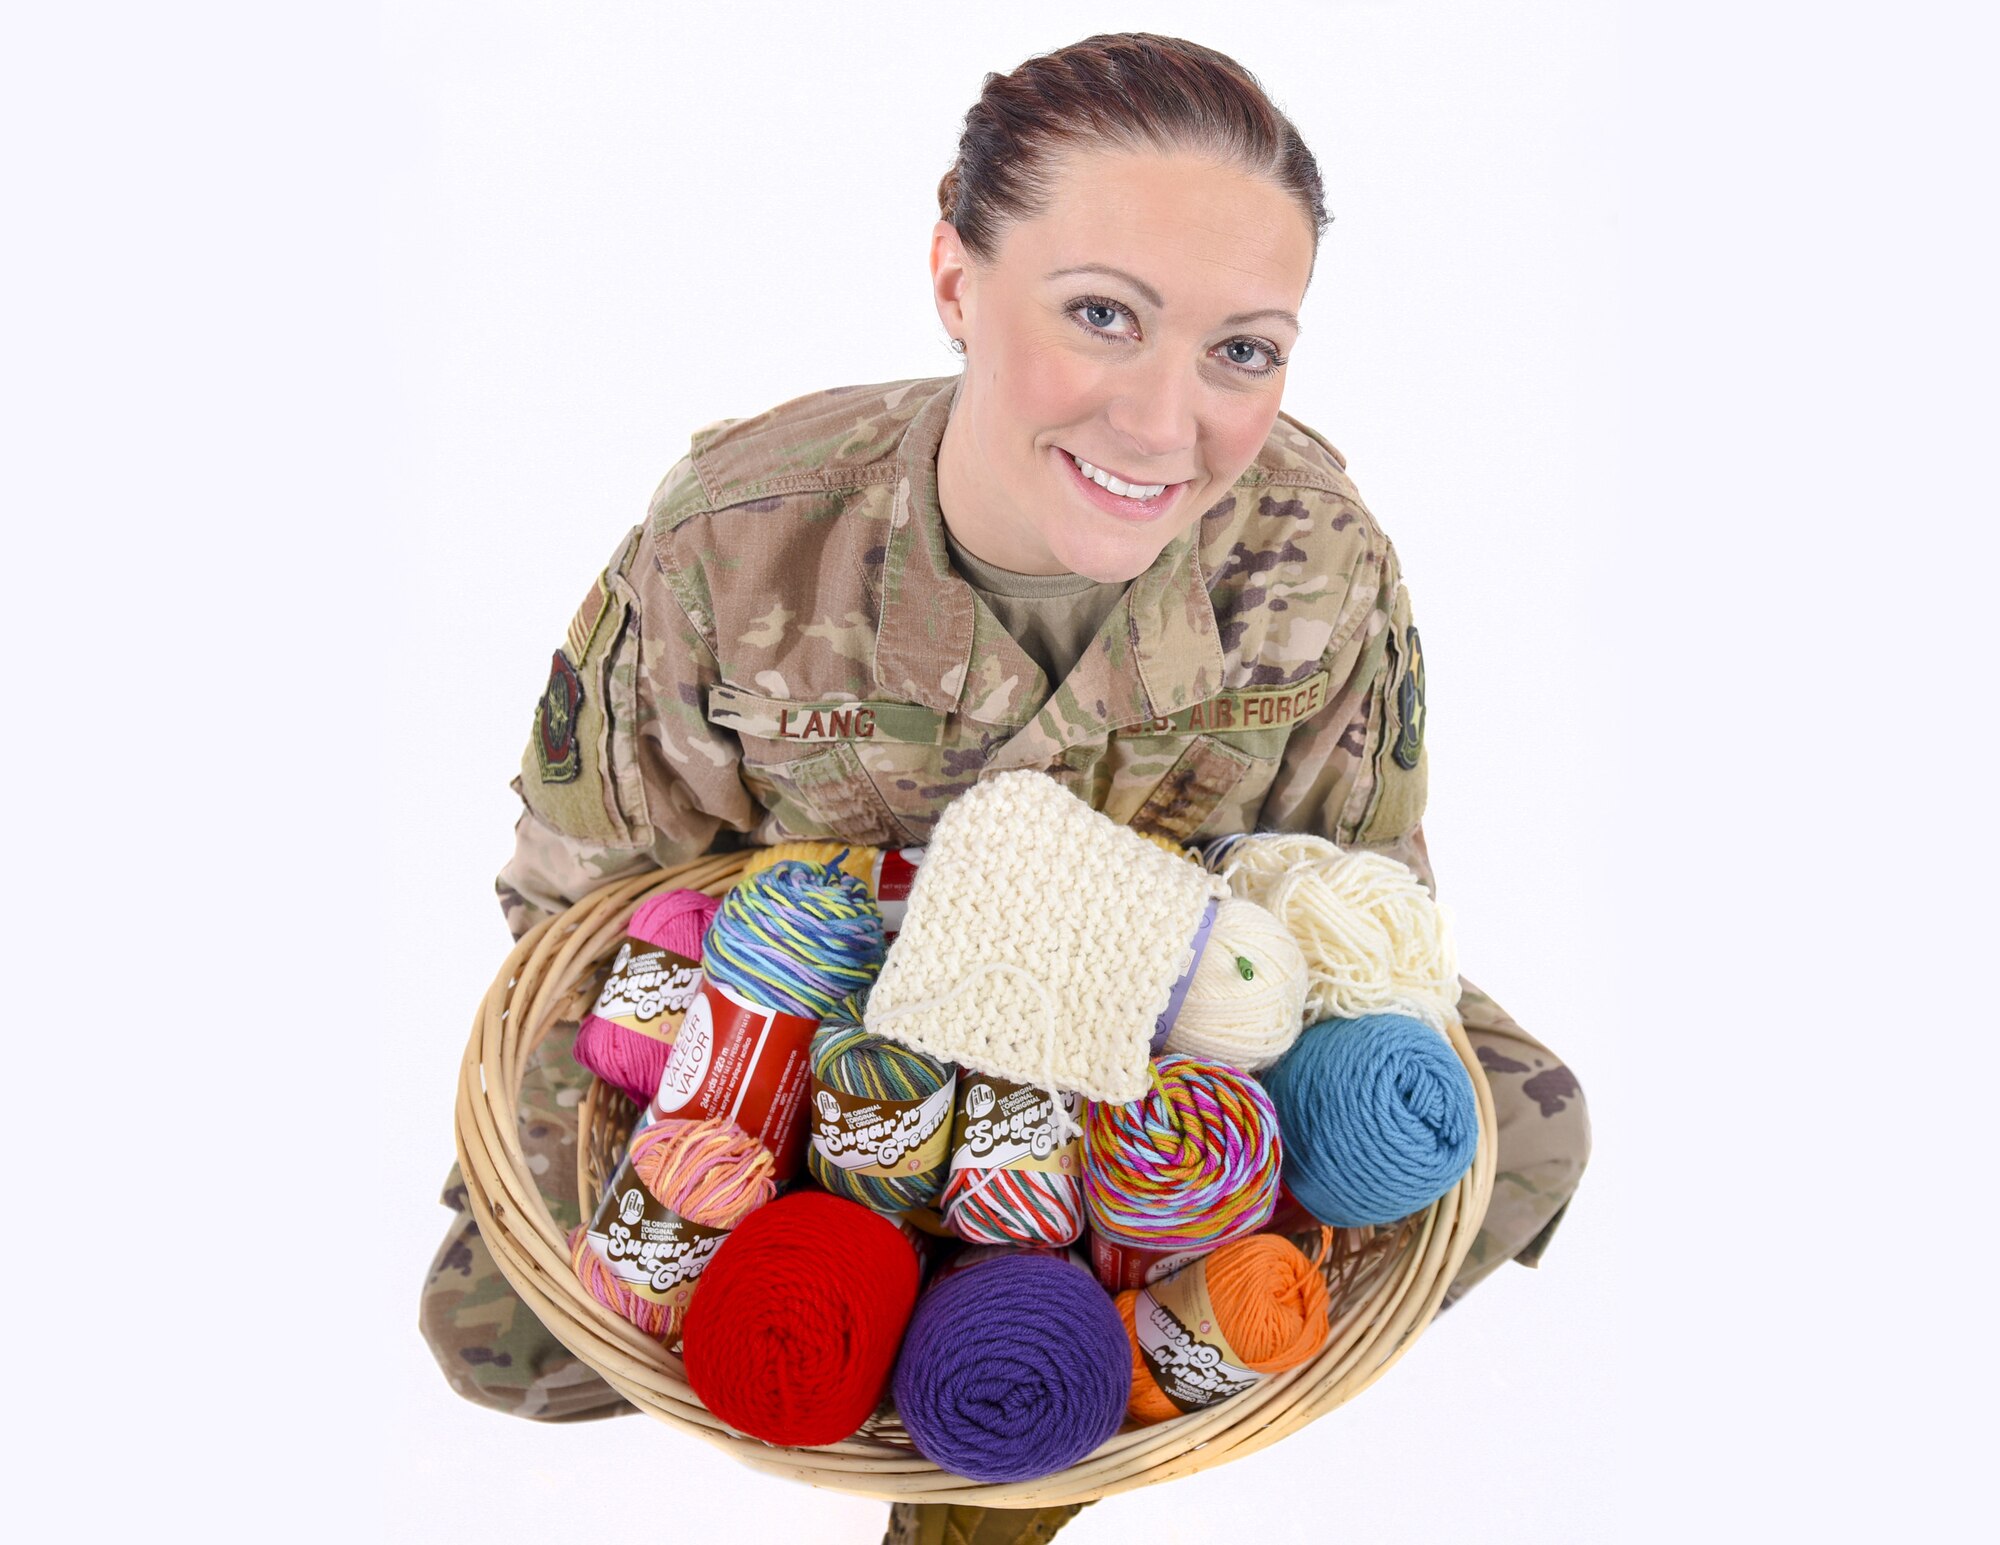 Tech. Sgt. Amber Lang poses for a photo holding a basket of yarn.